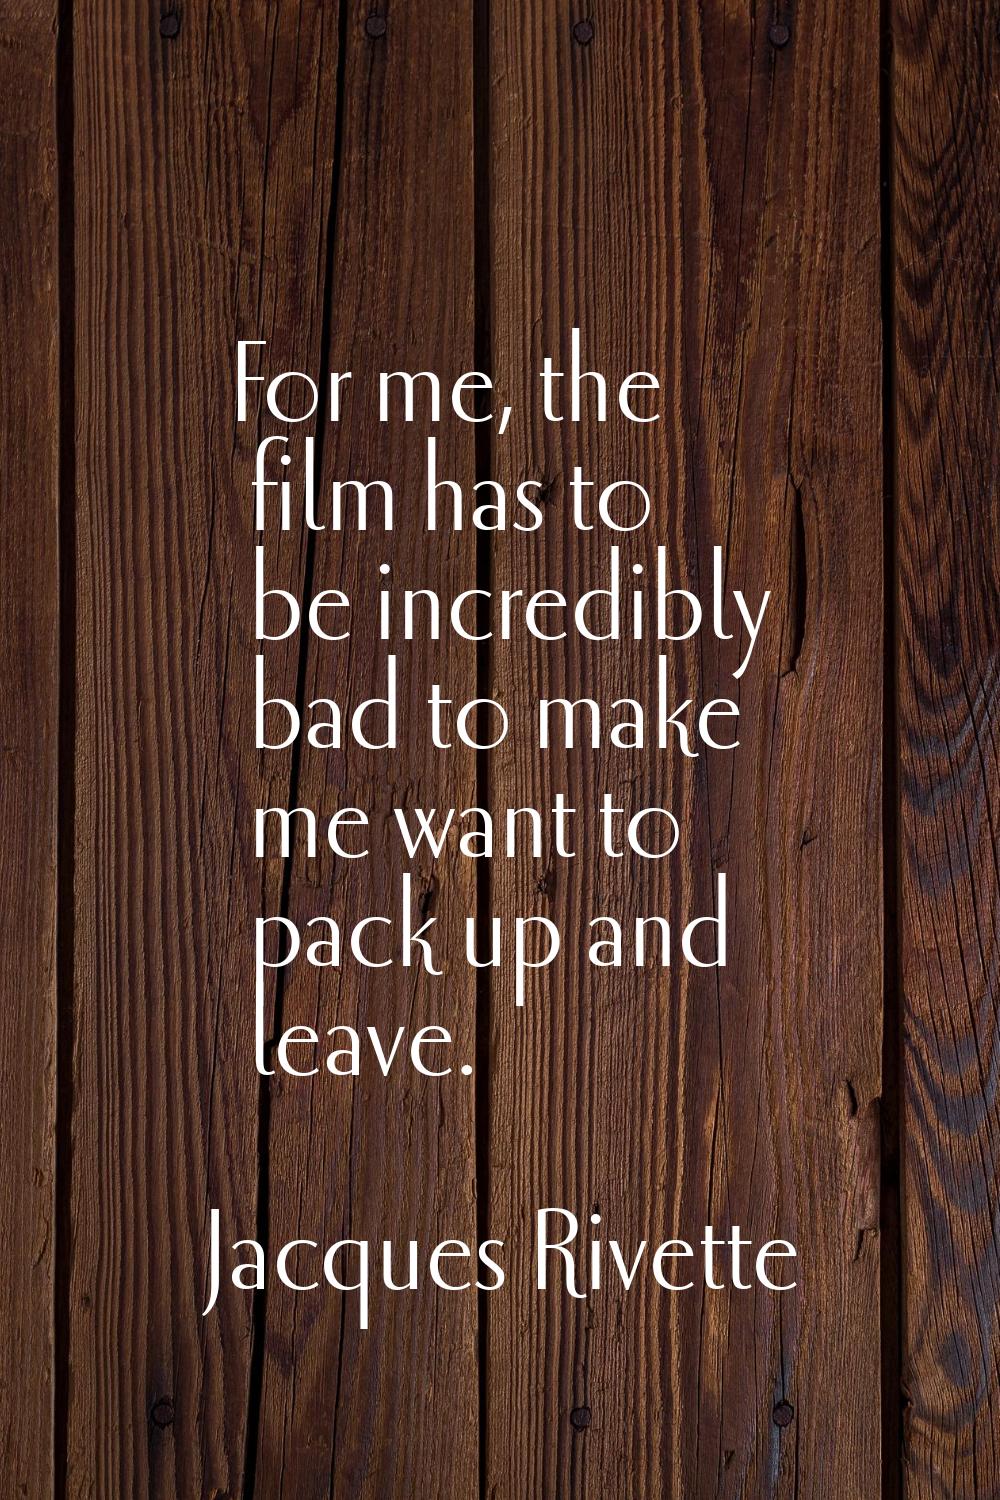 For me, the film has to be incredibly bad to make me want to pack up and leave.